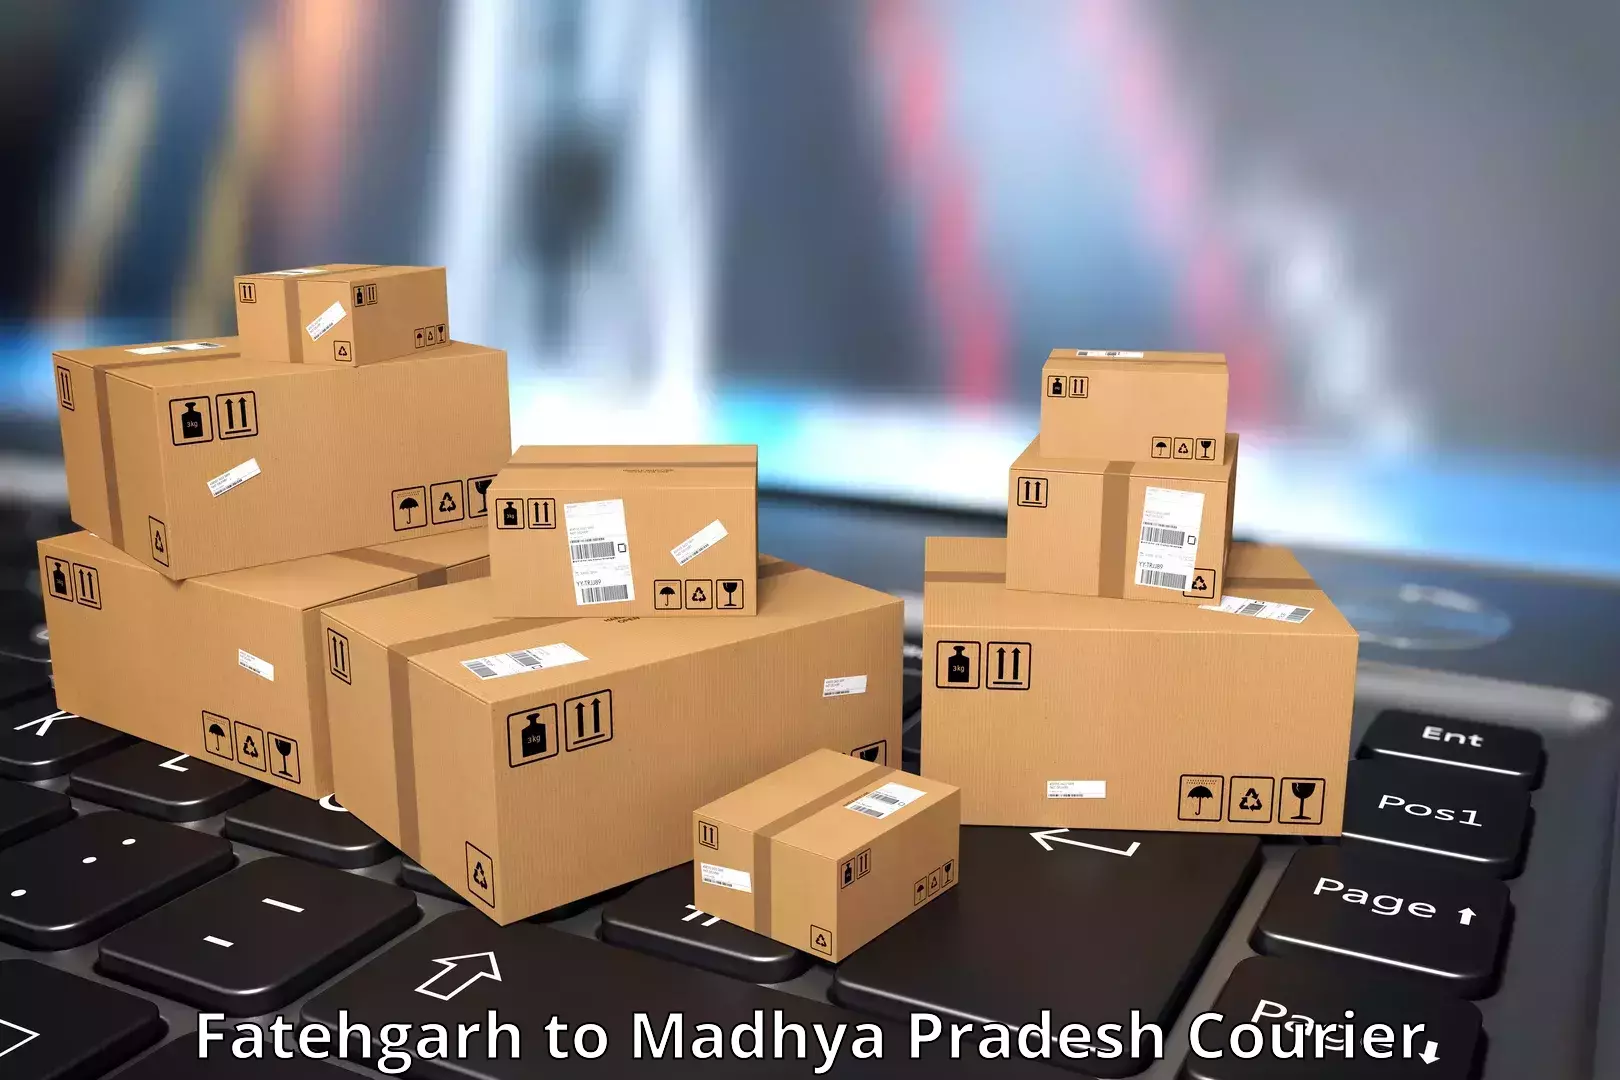 Easy access courier services Fatehgarh to Amanganj